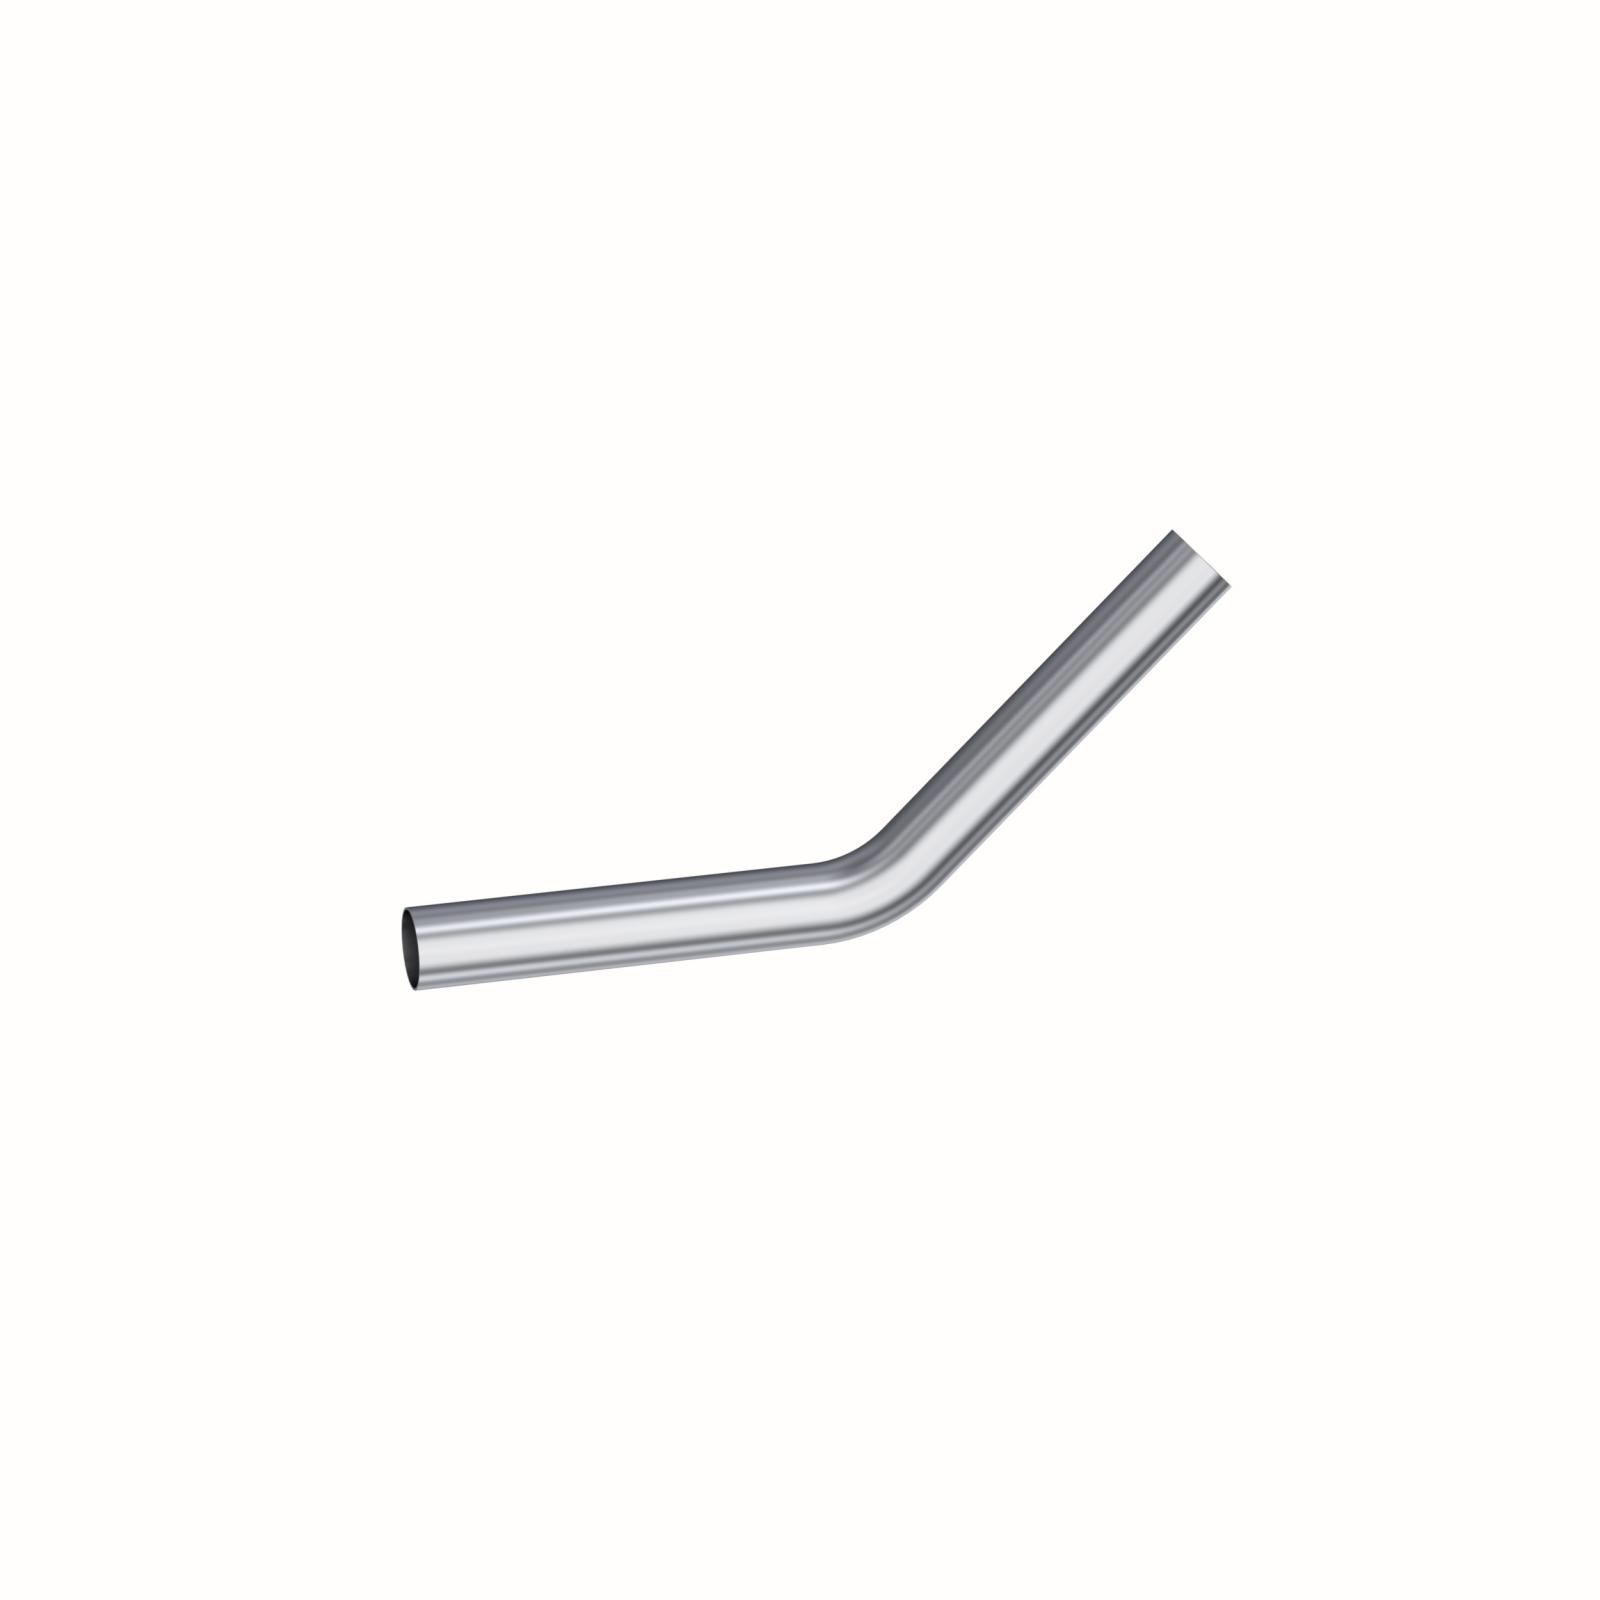 Exhaust Pipe 2.Exhaust Pipe 25 in 45 Degree Bend 1 2 in Legs Aluminized Steel MB